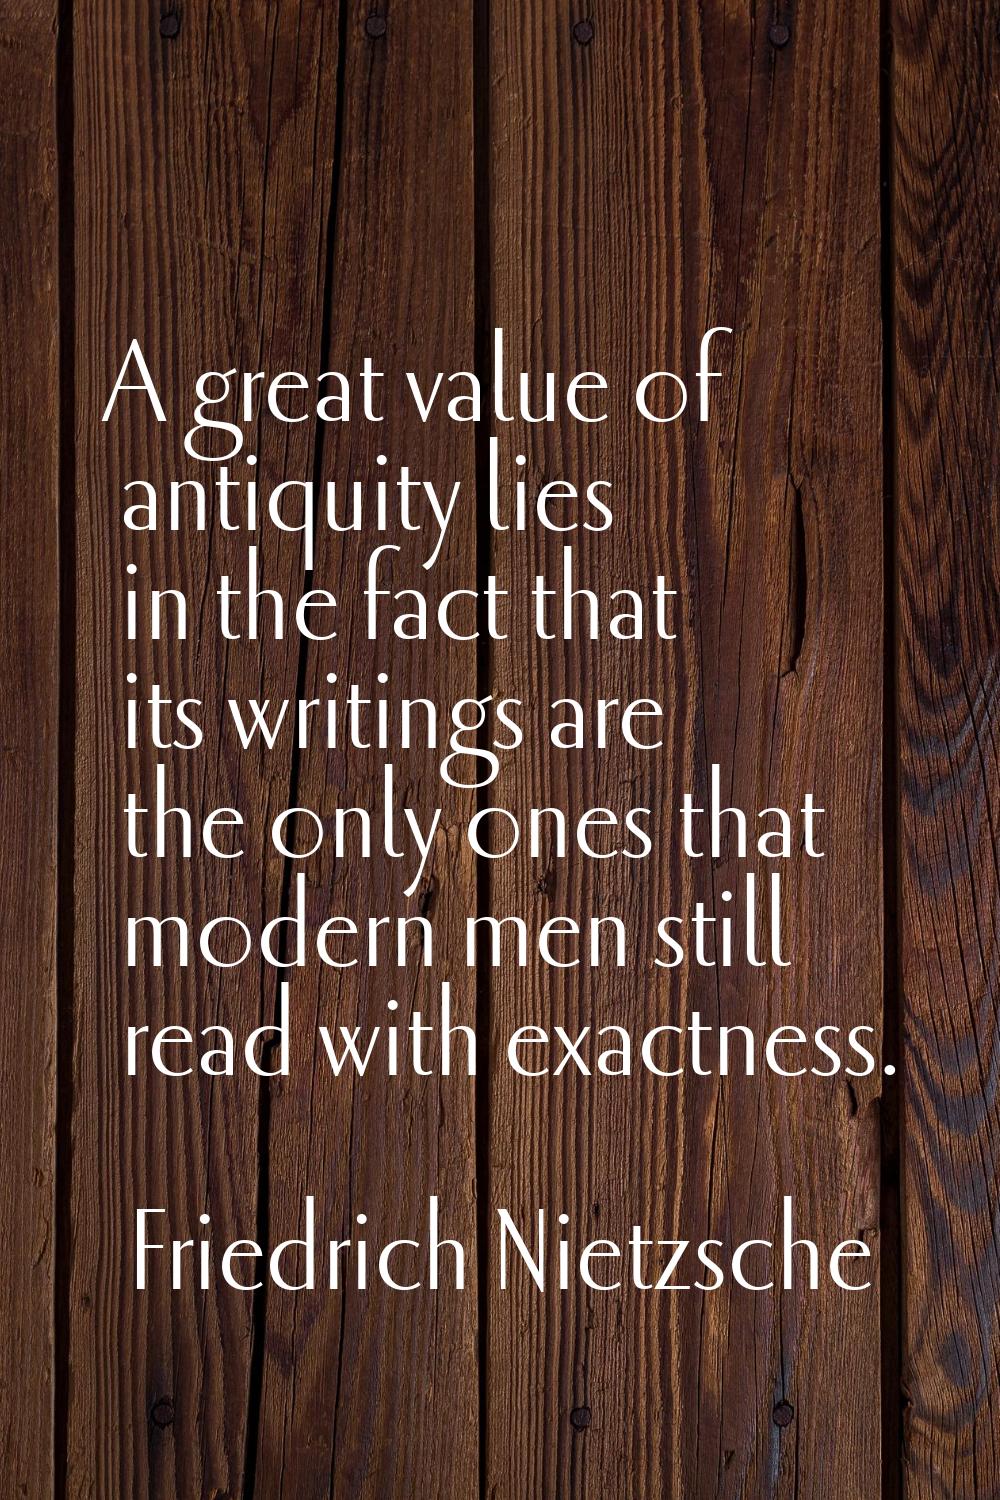 A great value of antiquity lies in the fact that its writings are the only ones that modern men sti